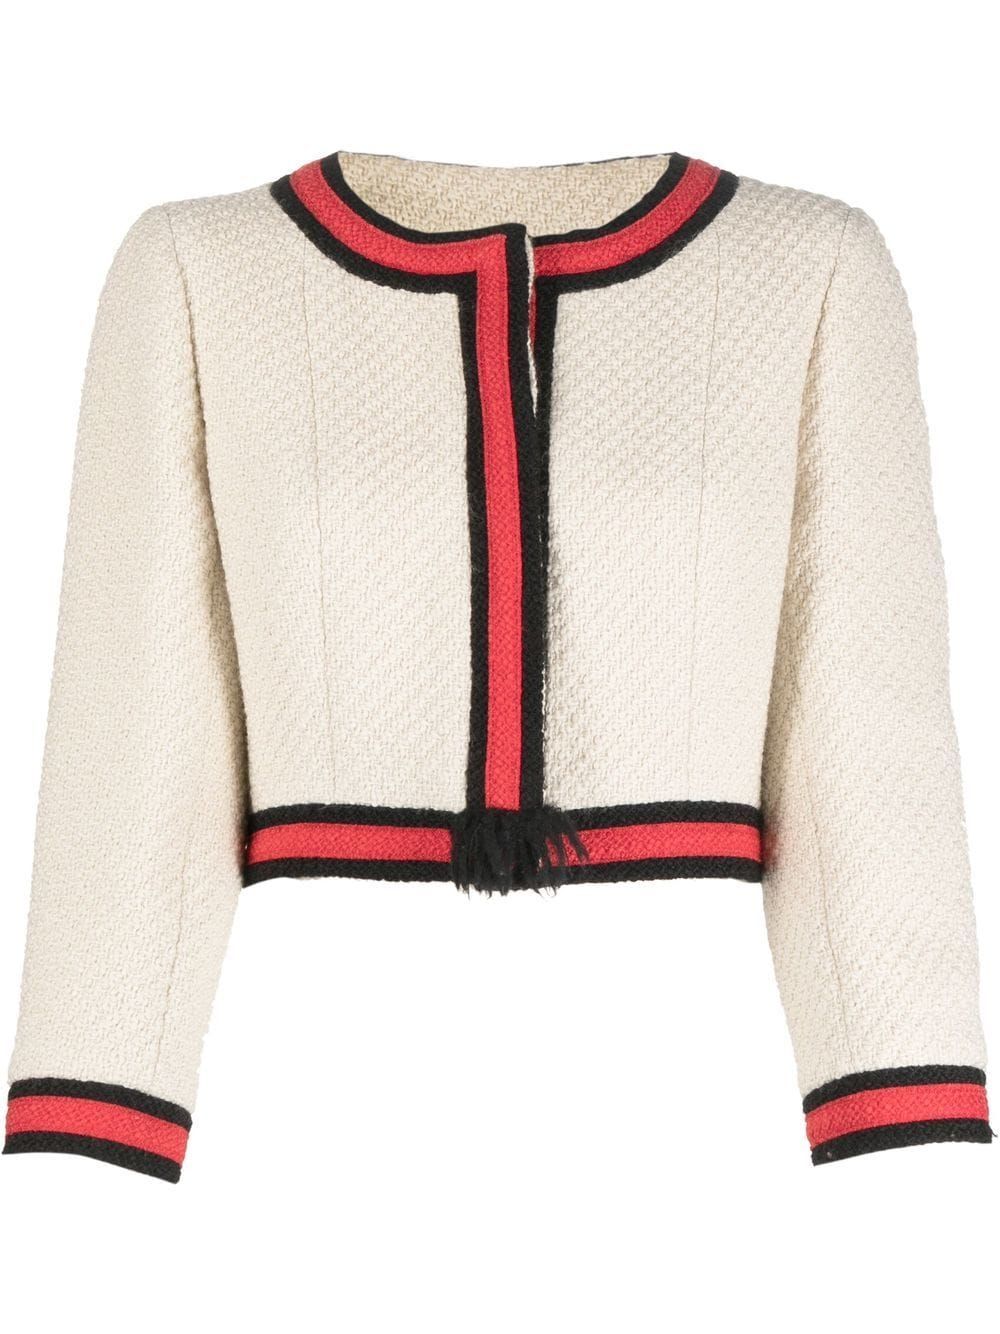 CHANEL Pre-Owned Pre-Owned Jackets for Women - Shop on FARFETCH